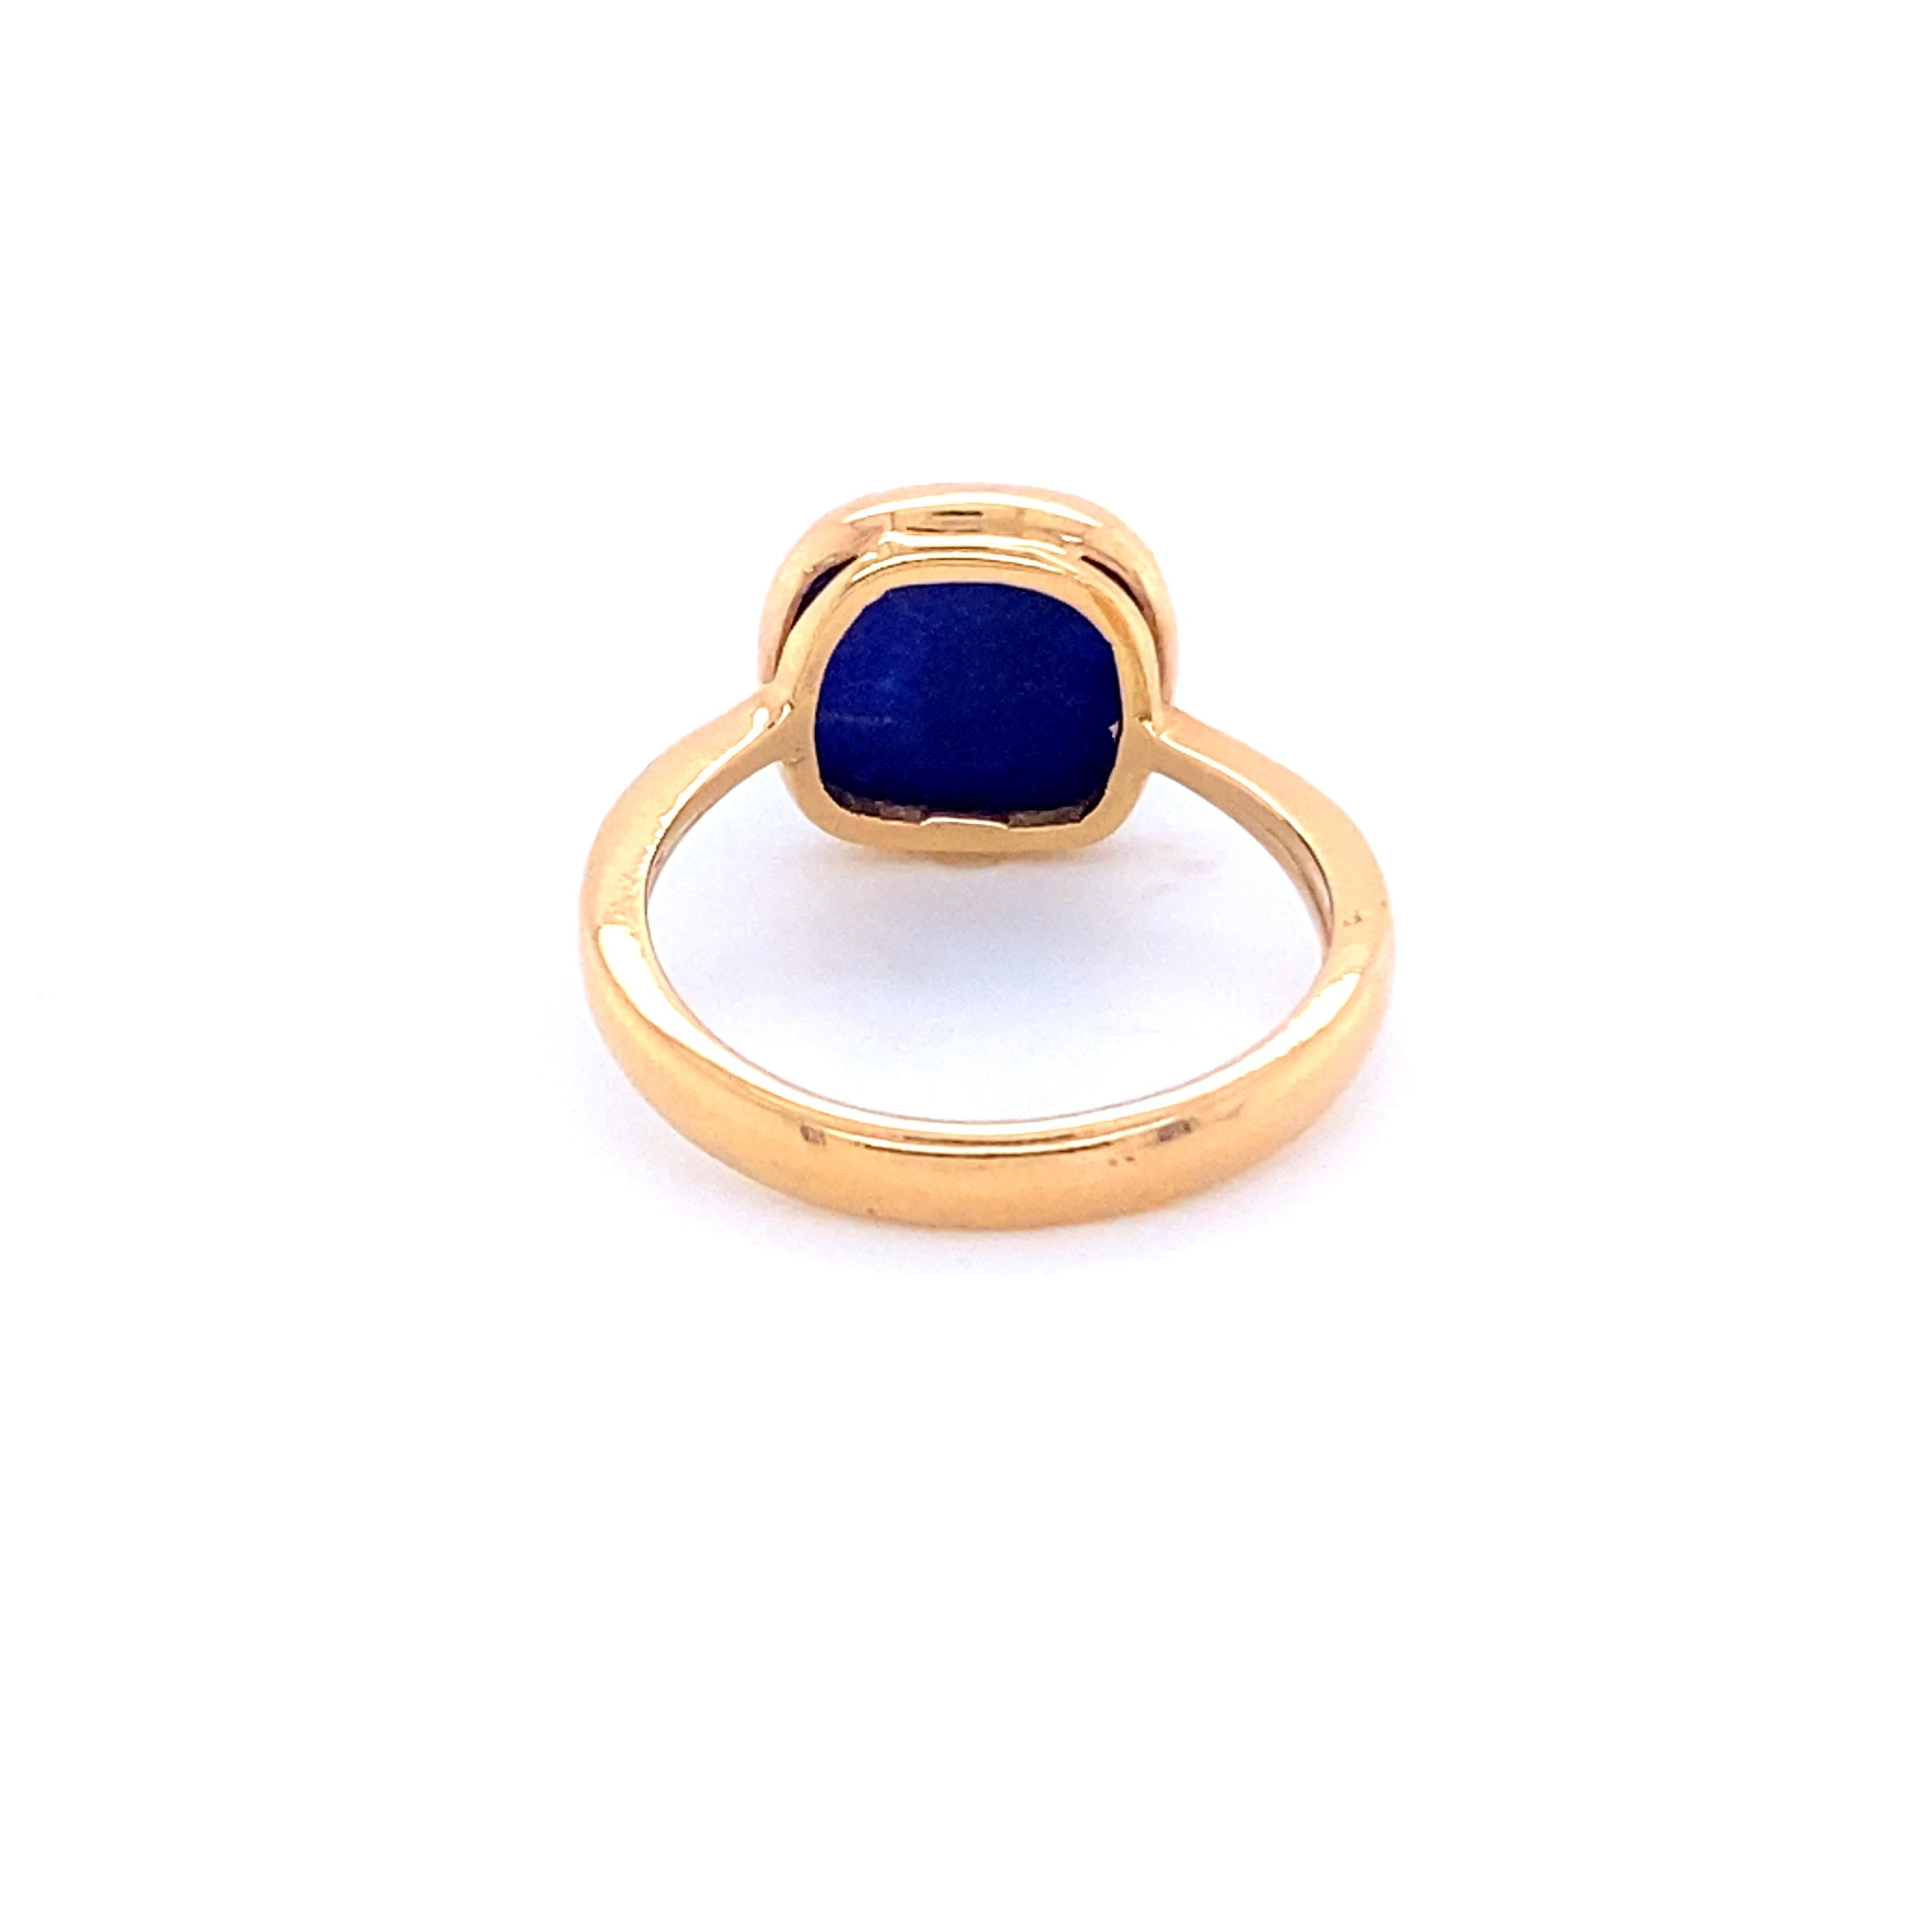 Artisan Rose Gold Cocktail Ring with a Cabochon Lapis Lazuli For Sale